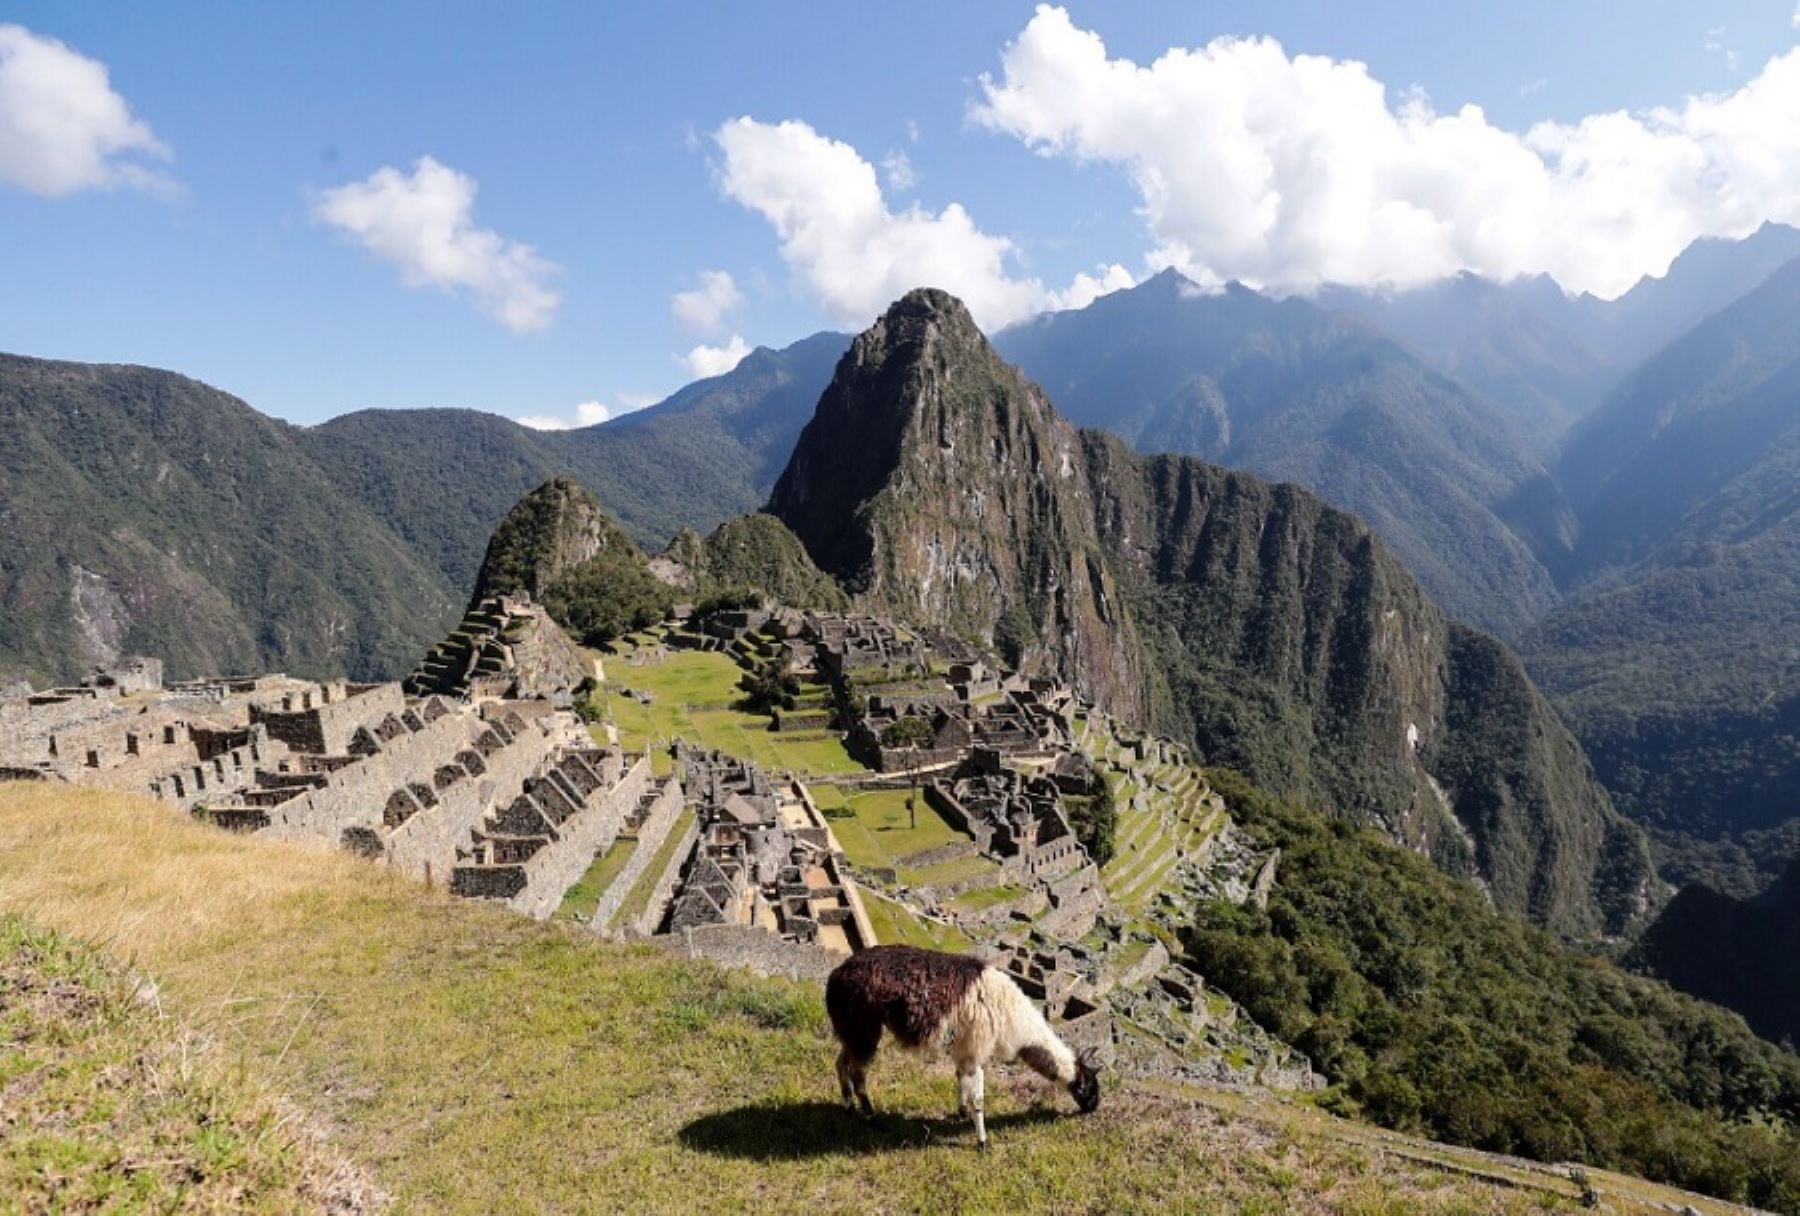 Peru unrest: Entry to famed tourist site Machu Picchu suspended until further notice